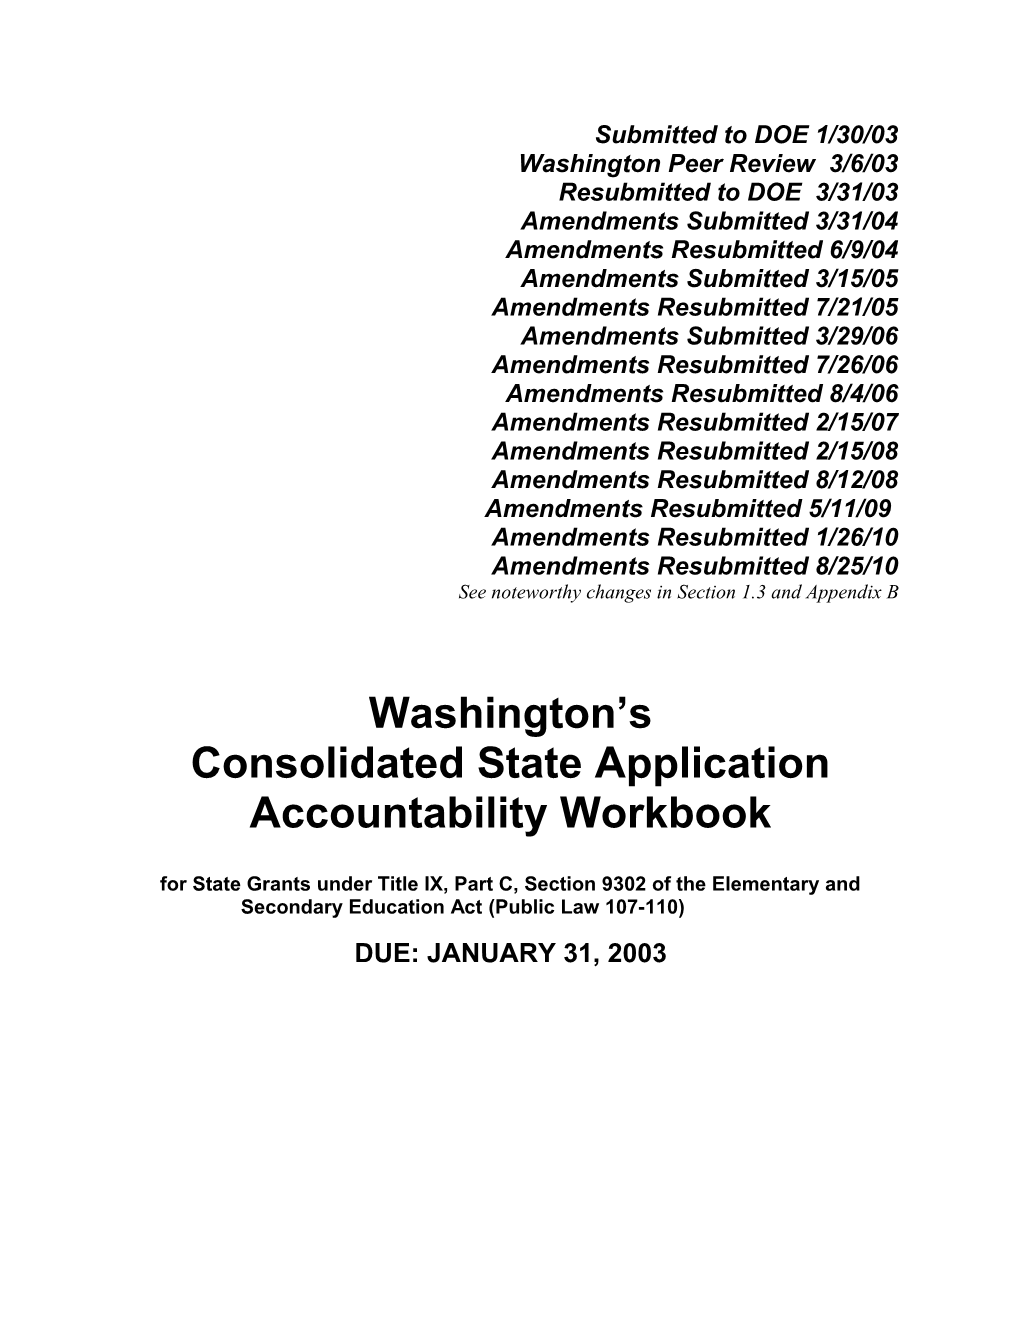 Washington Consolidated State Application Accountability Workbook August 25, 2010 (MSWORD)